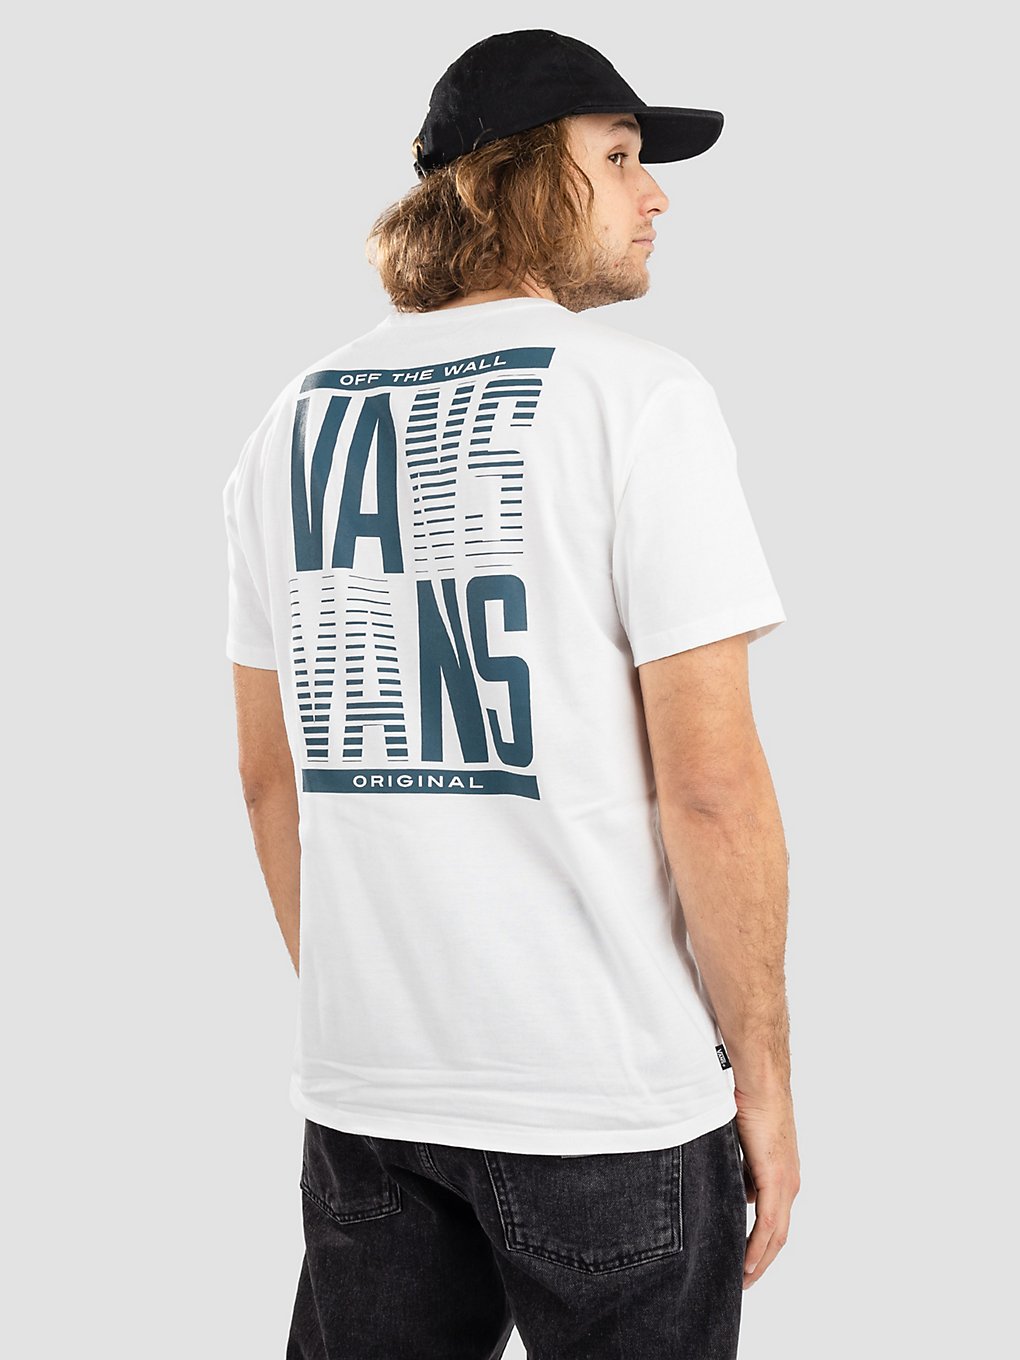 Vans Off The Wall Stacked Typed T-Shirt white kaufen